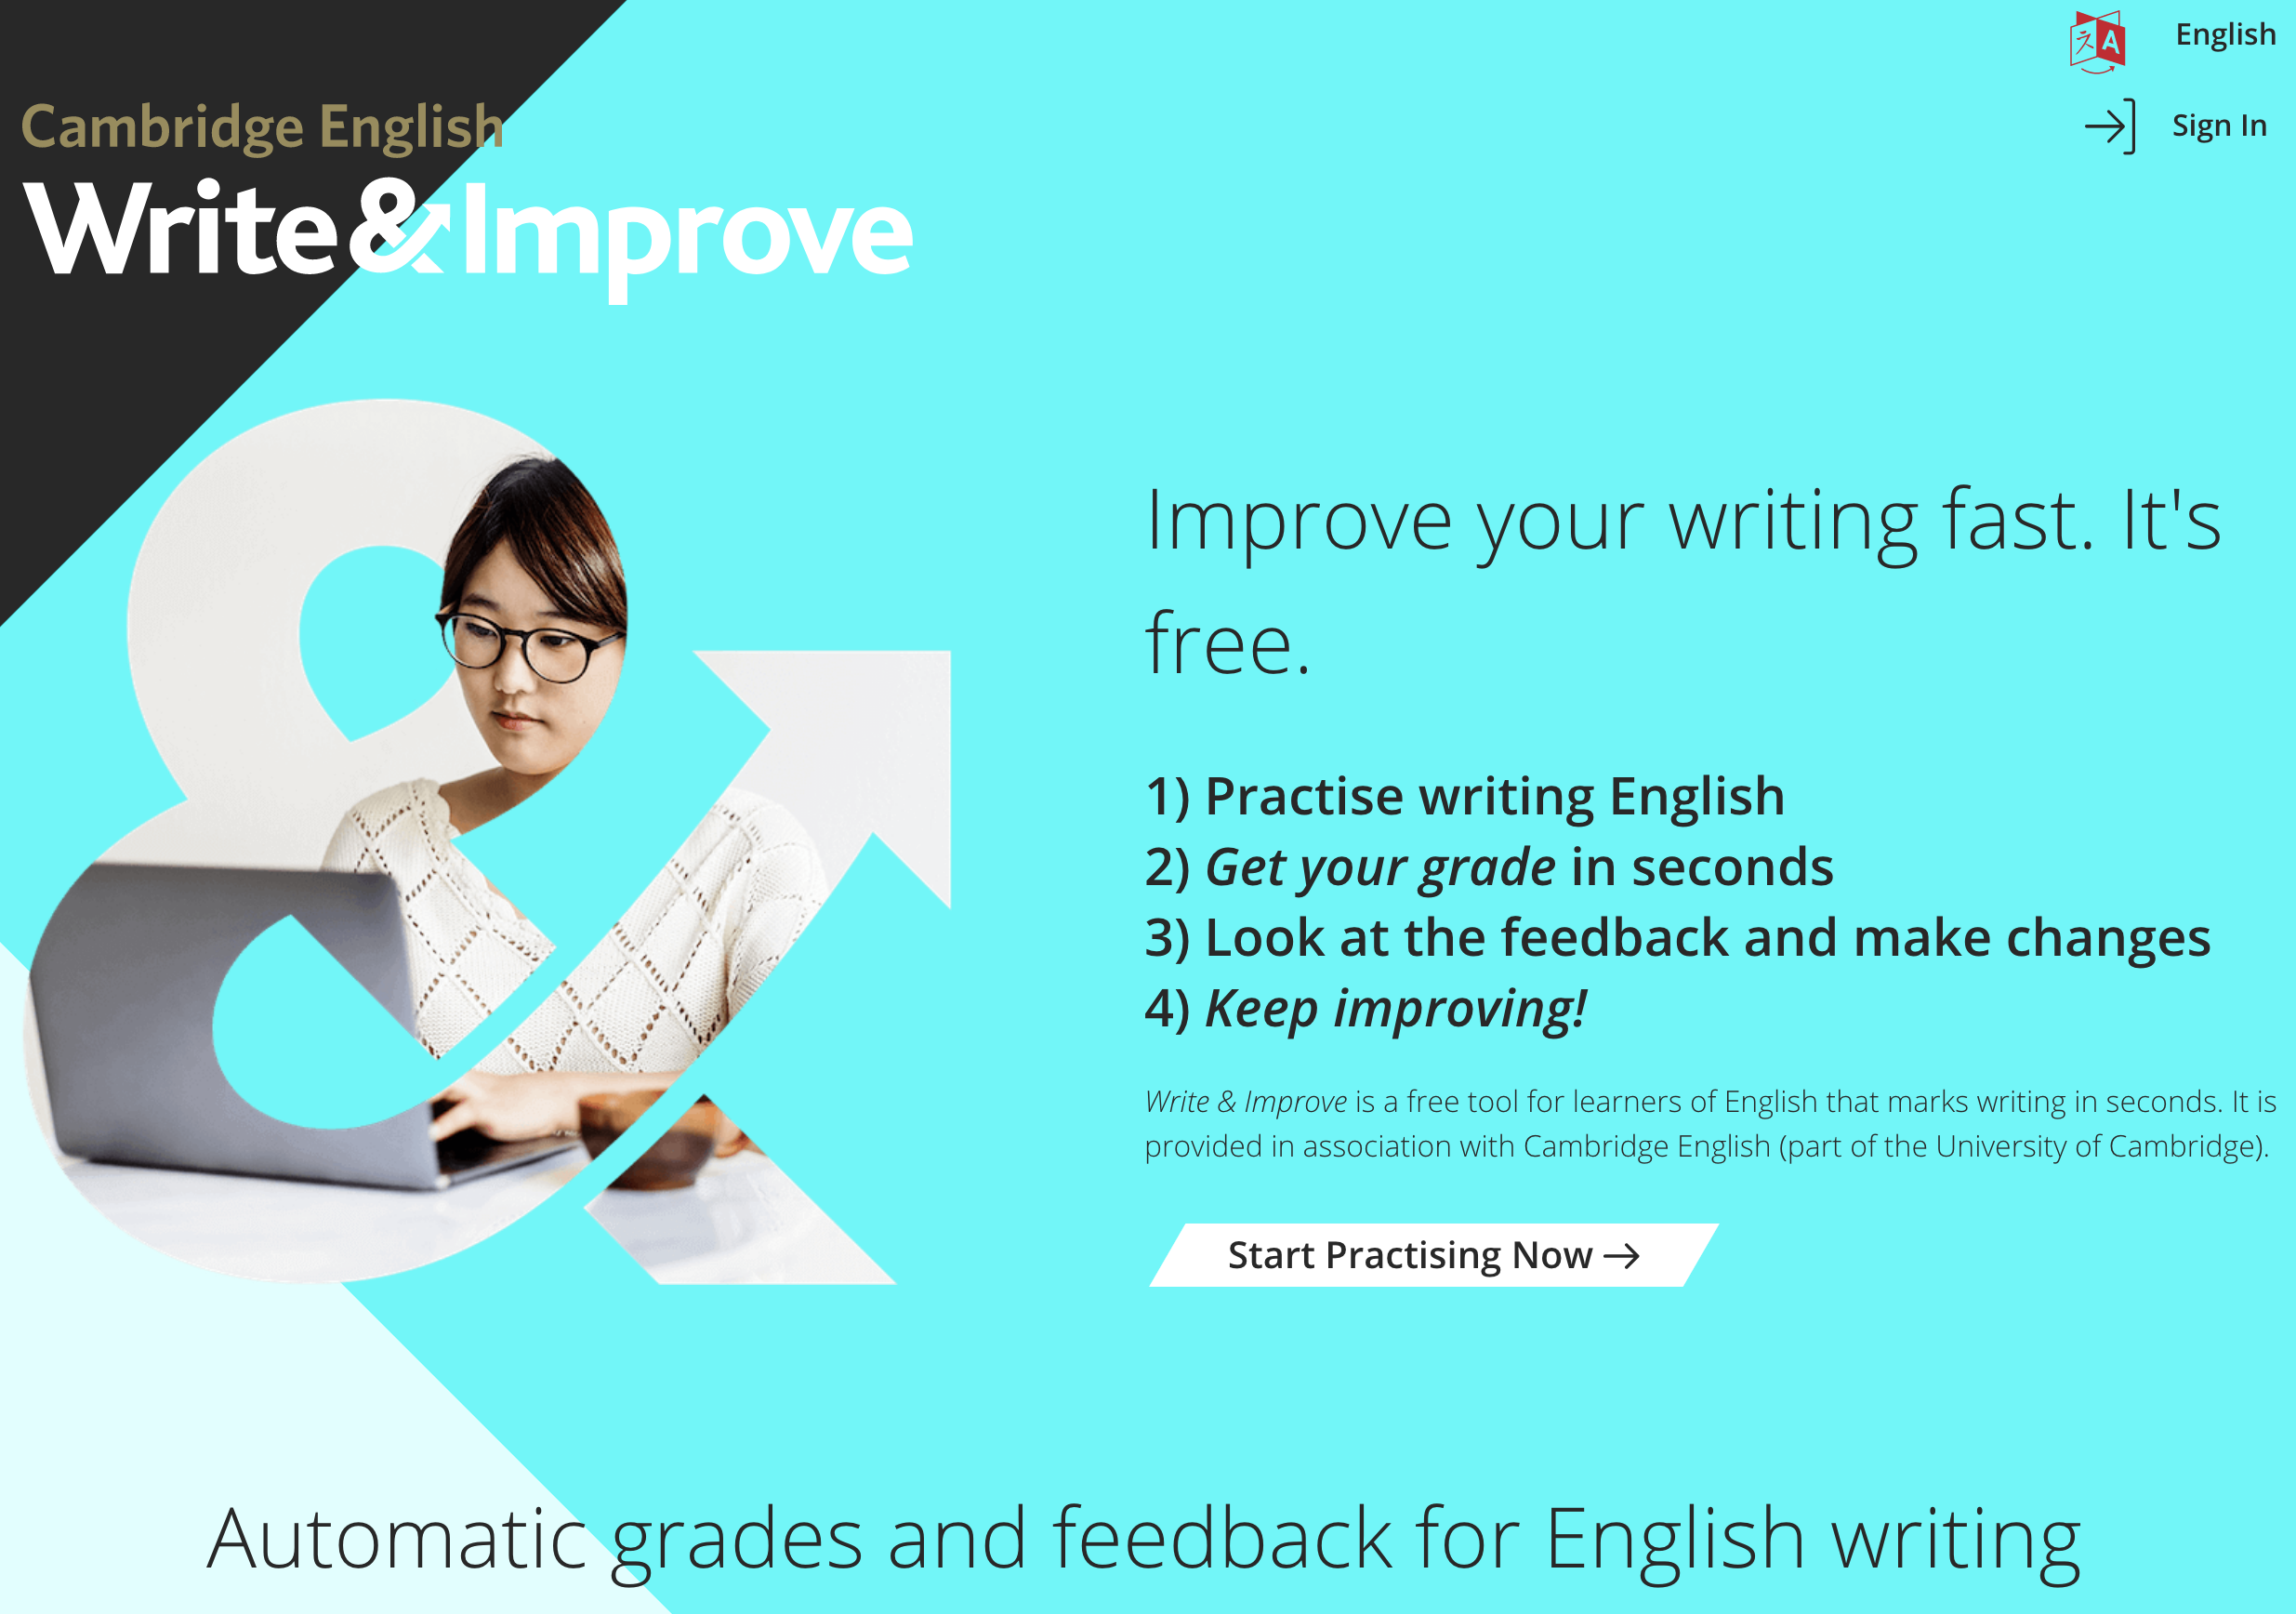 Get feedback on your writing in seconds. It’s free. By Cambridge